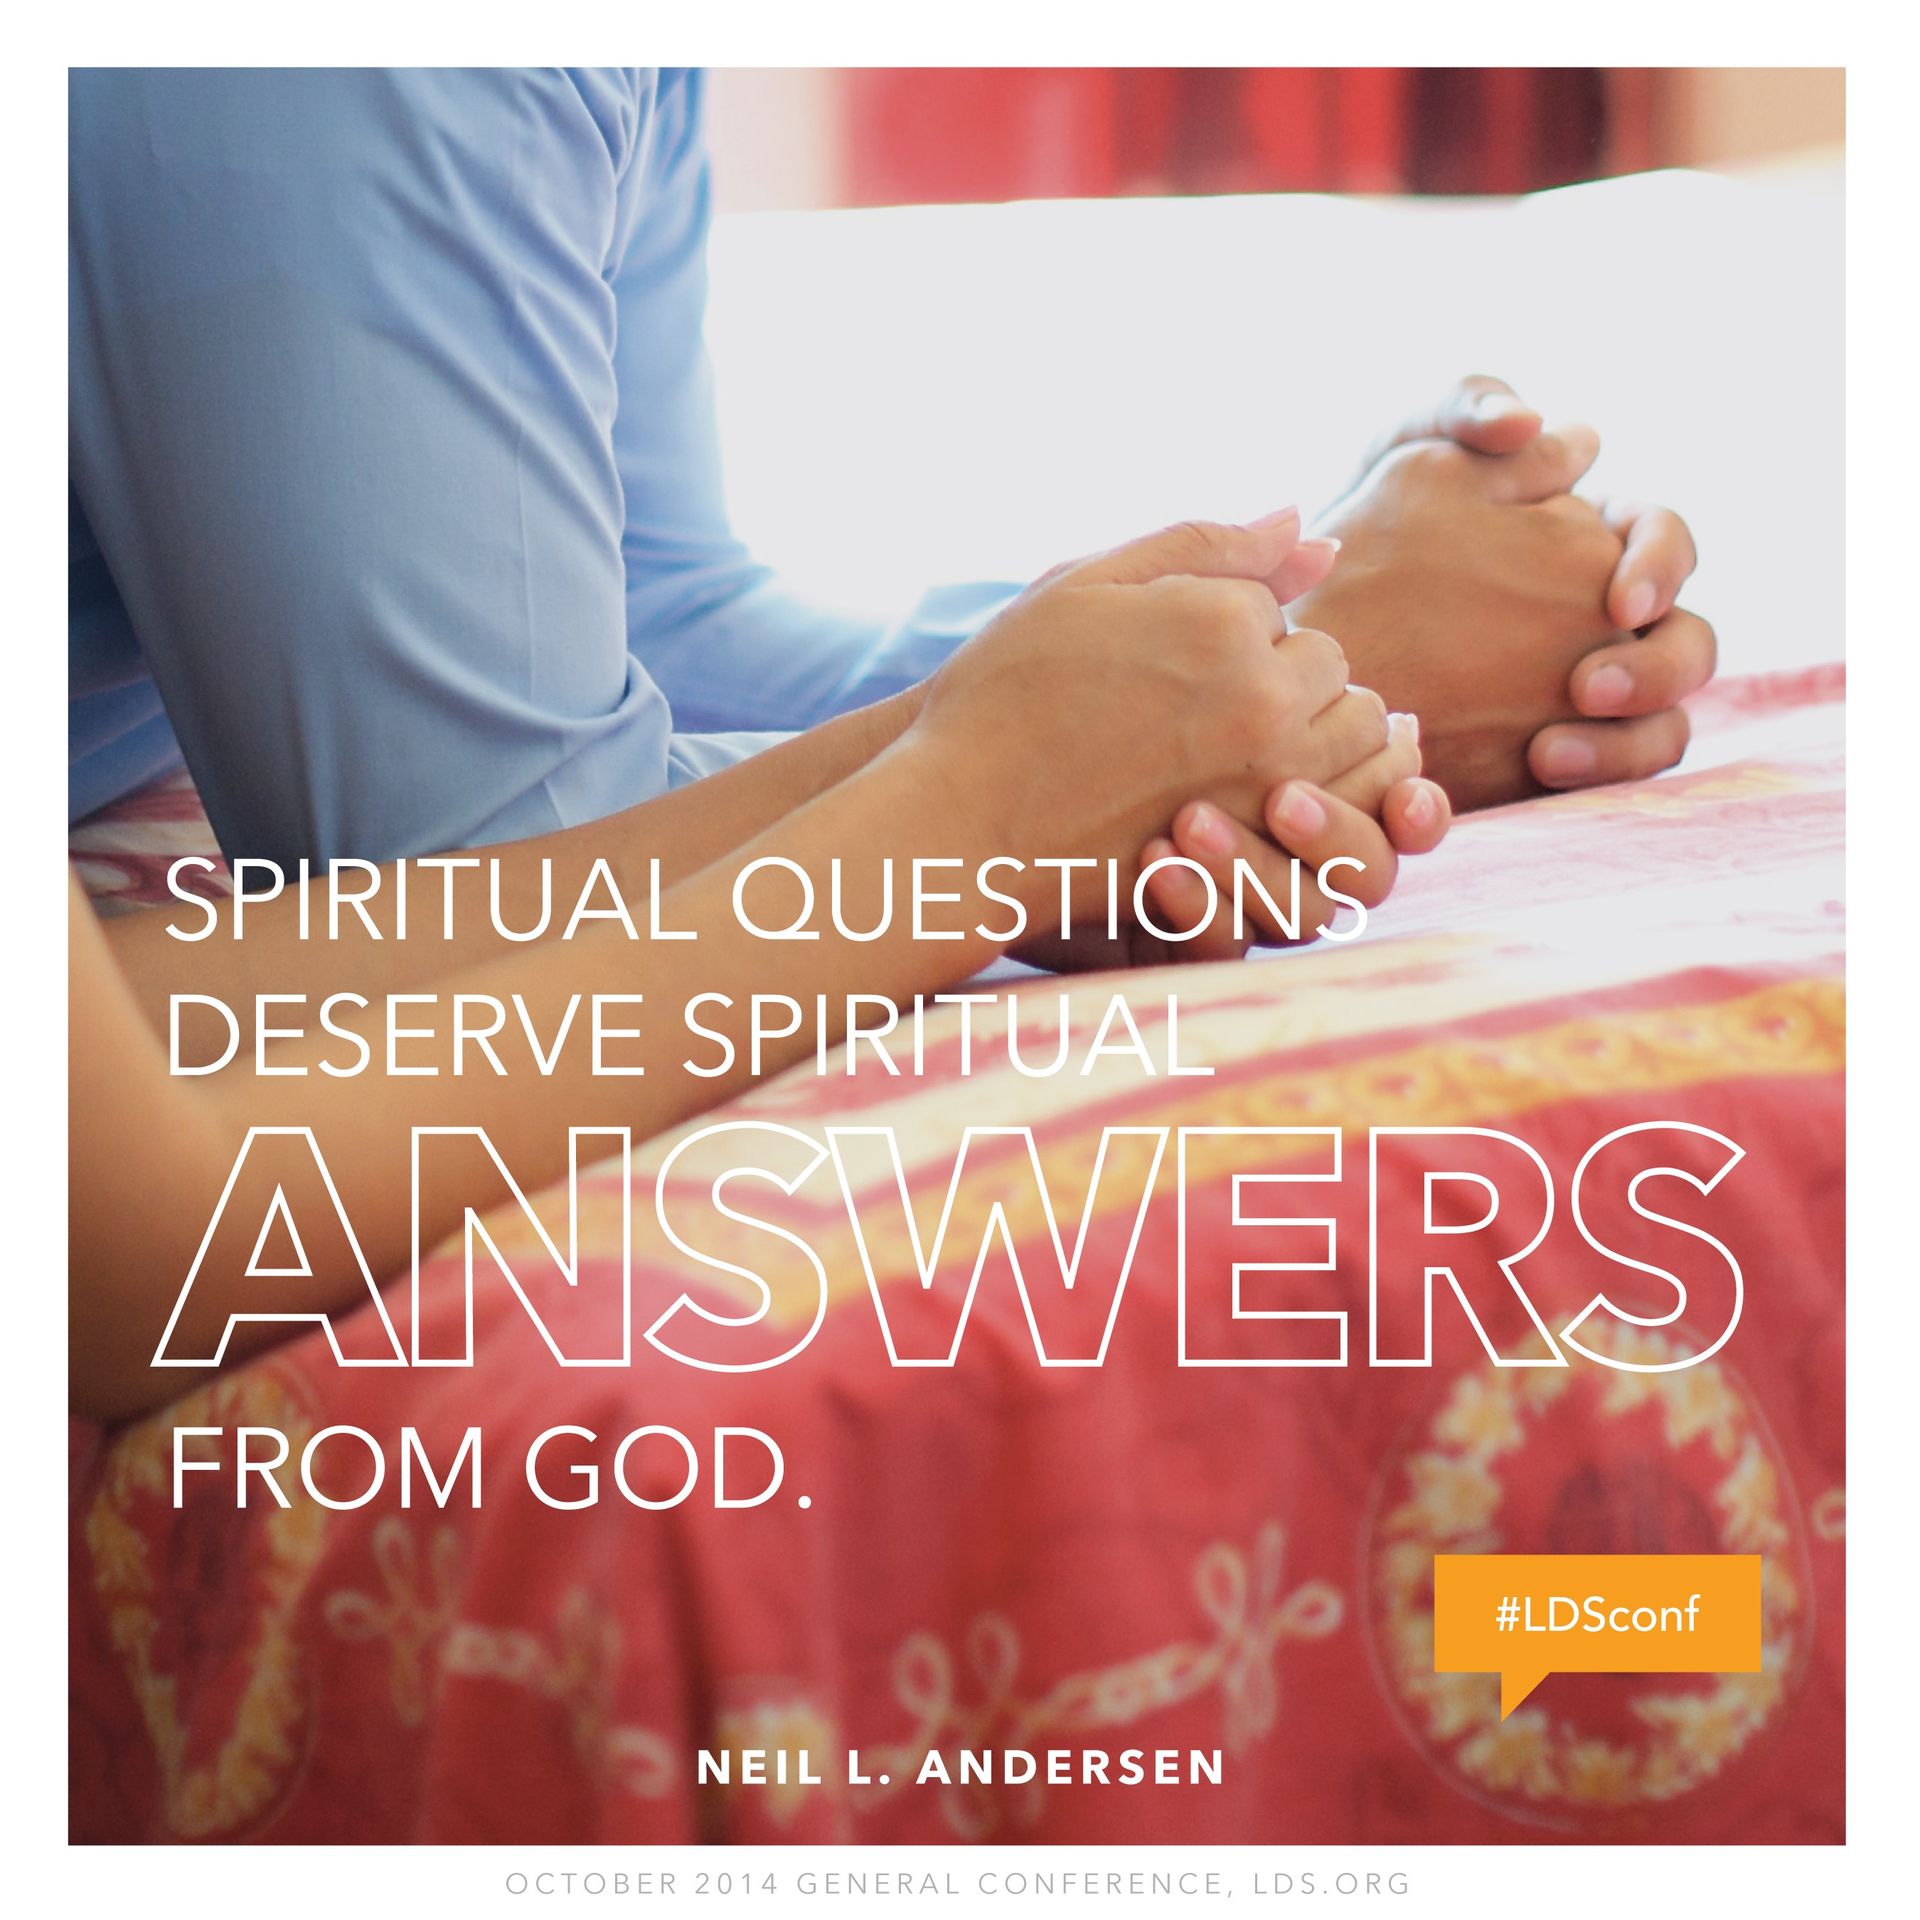 “Spiritual questions deserve spiritual answers from God.”—Elder Neil L. Andersen, “Joseph Smith” © undefined ipCode 1.